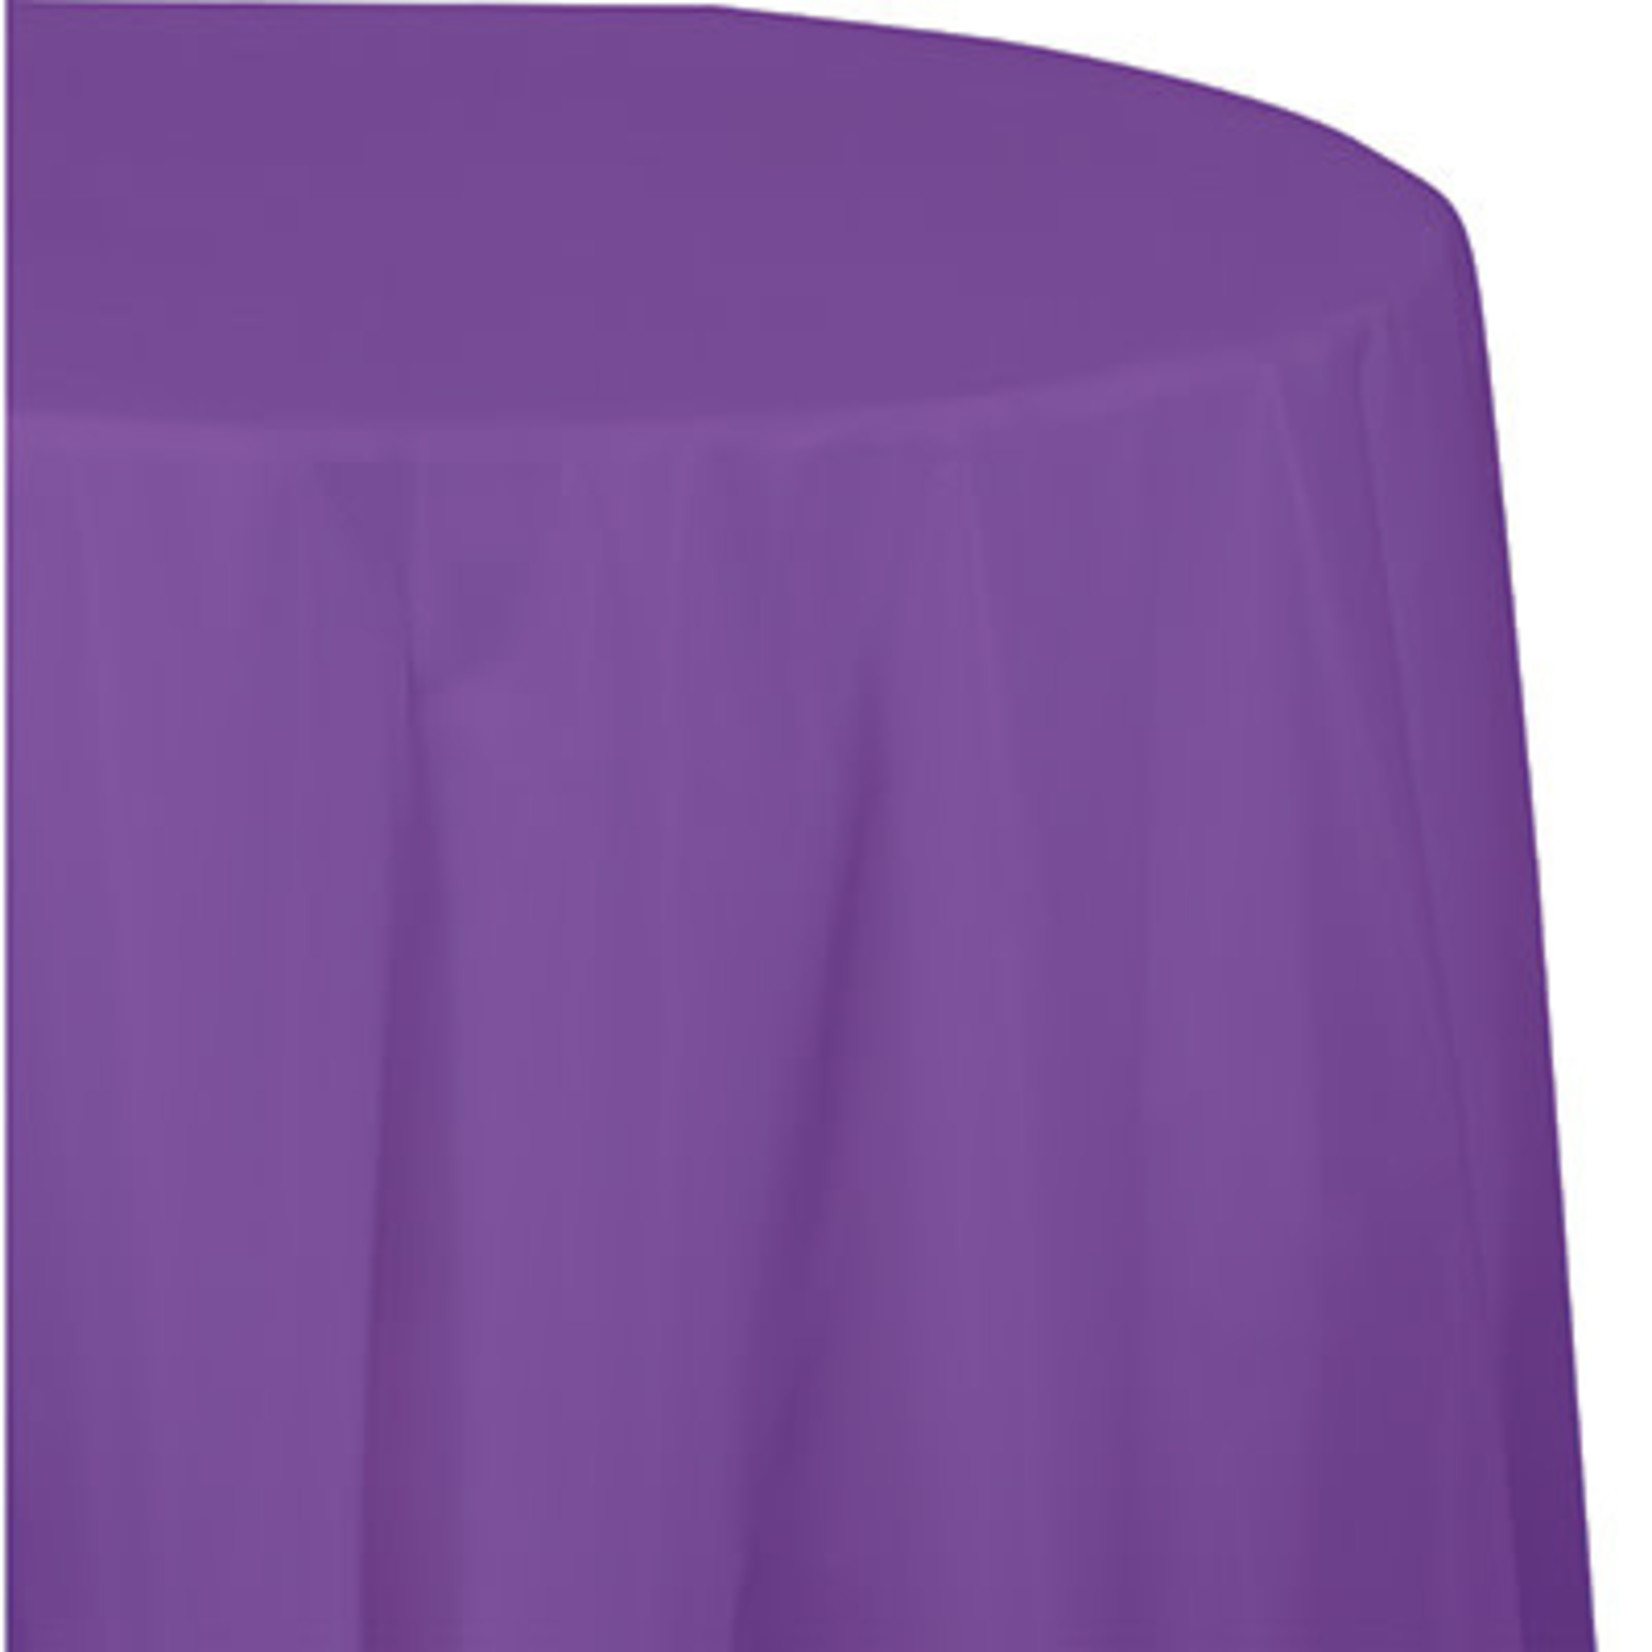 Touch of Color 82" Amethyst Purple Round Plastic Tablecover - 1ct.